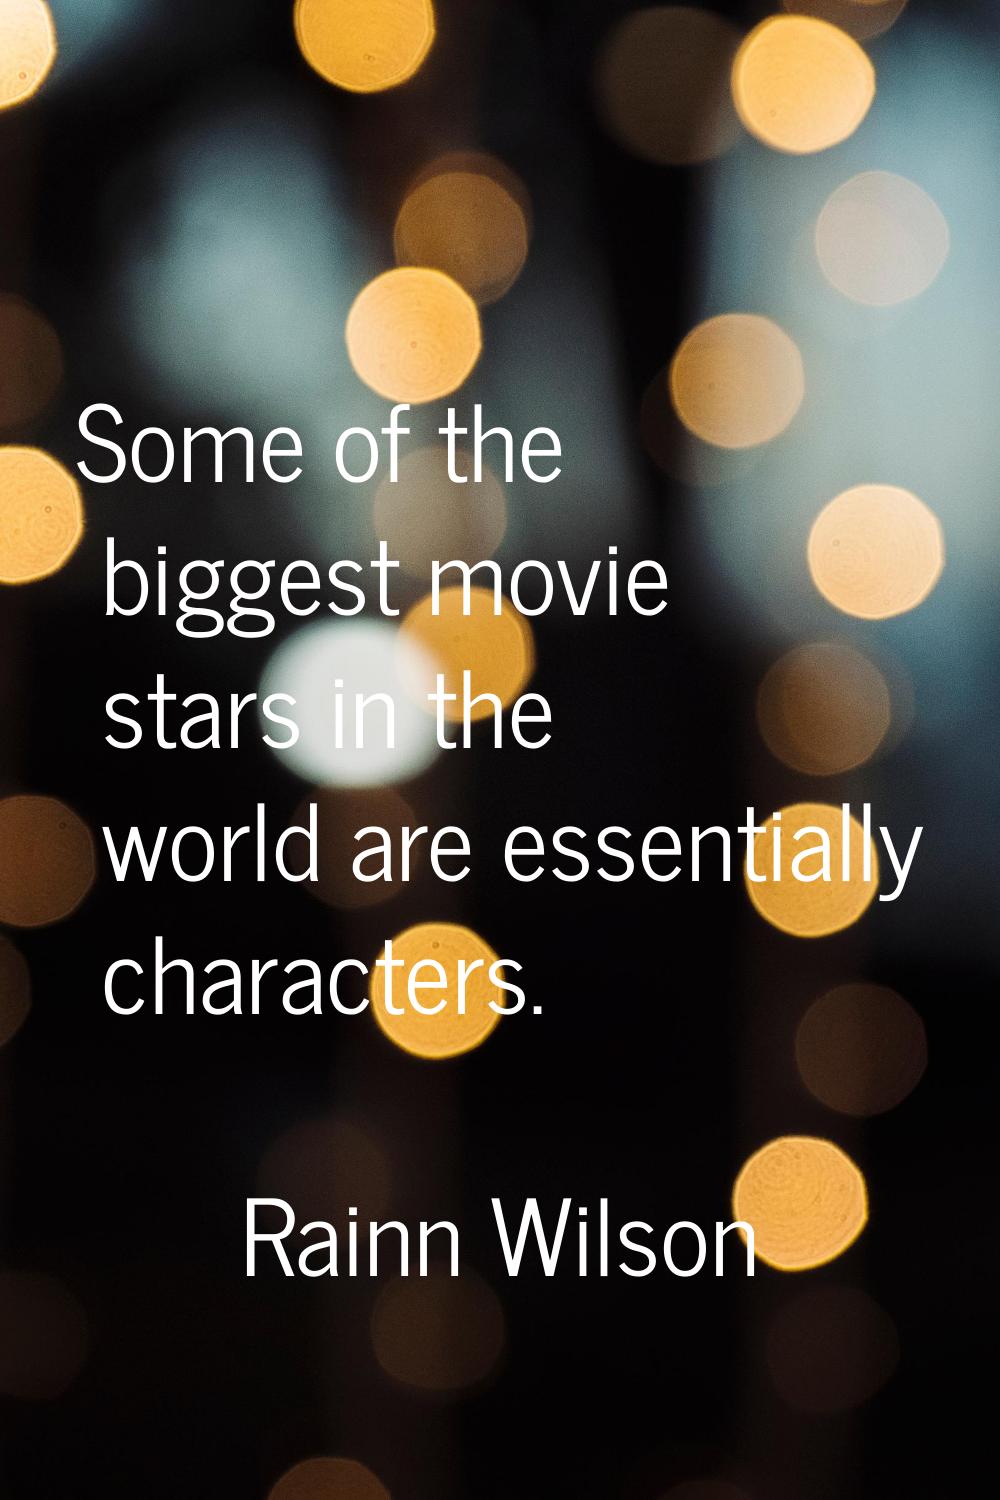 Some of the biggest movie stars in the world are essentially characters.